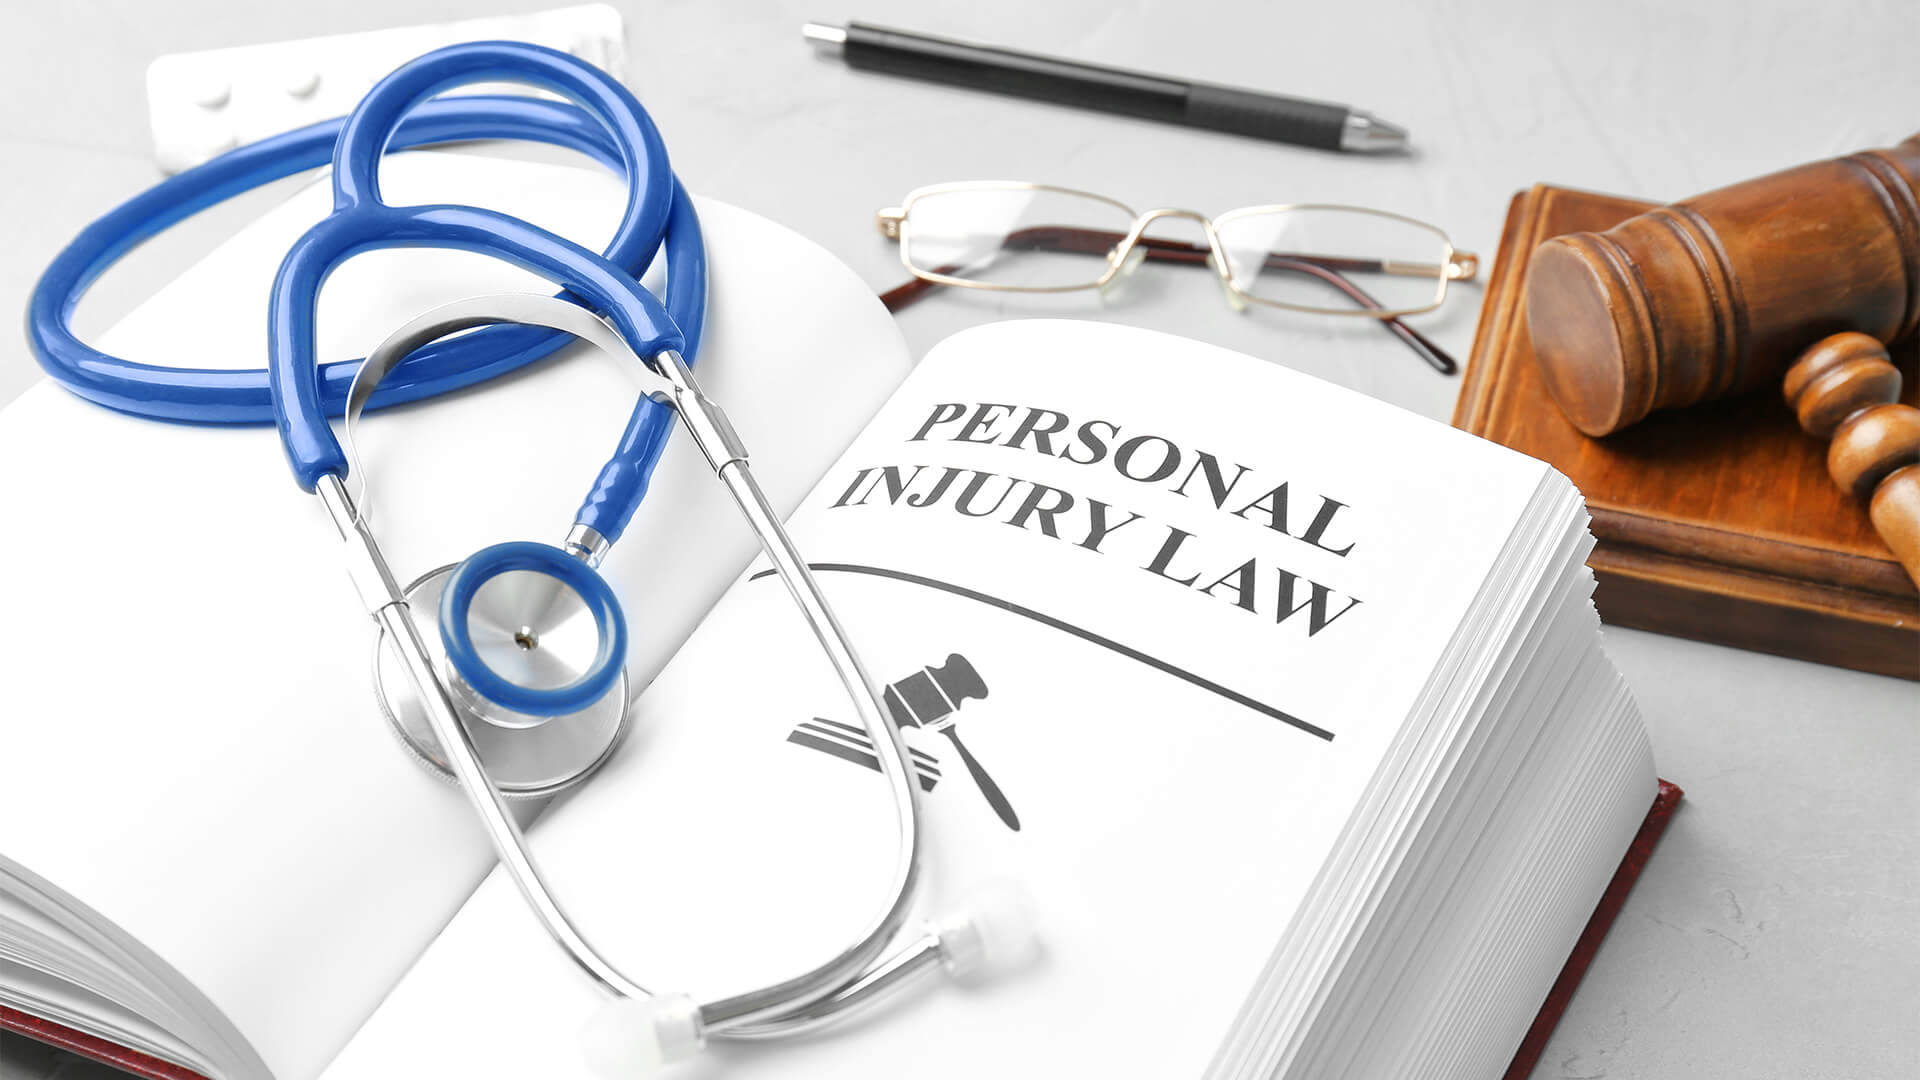 An Overview of the Personal Injury Law